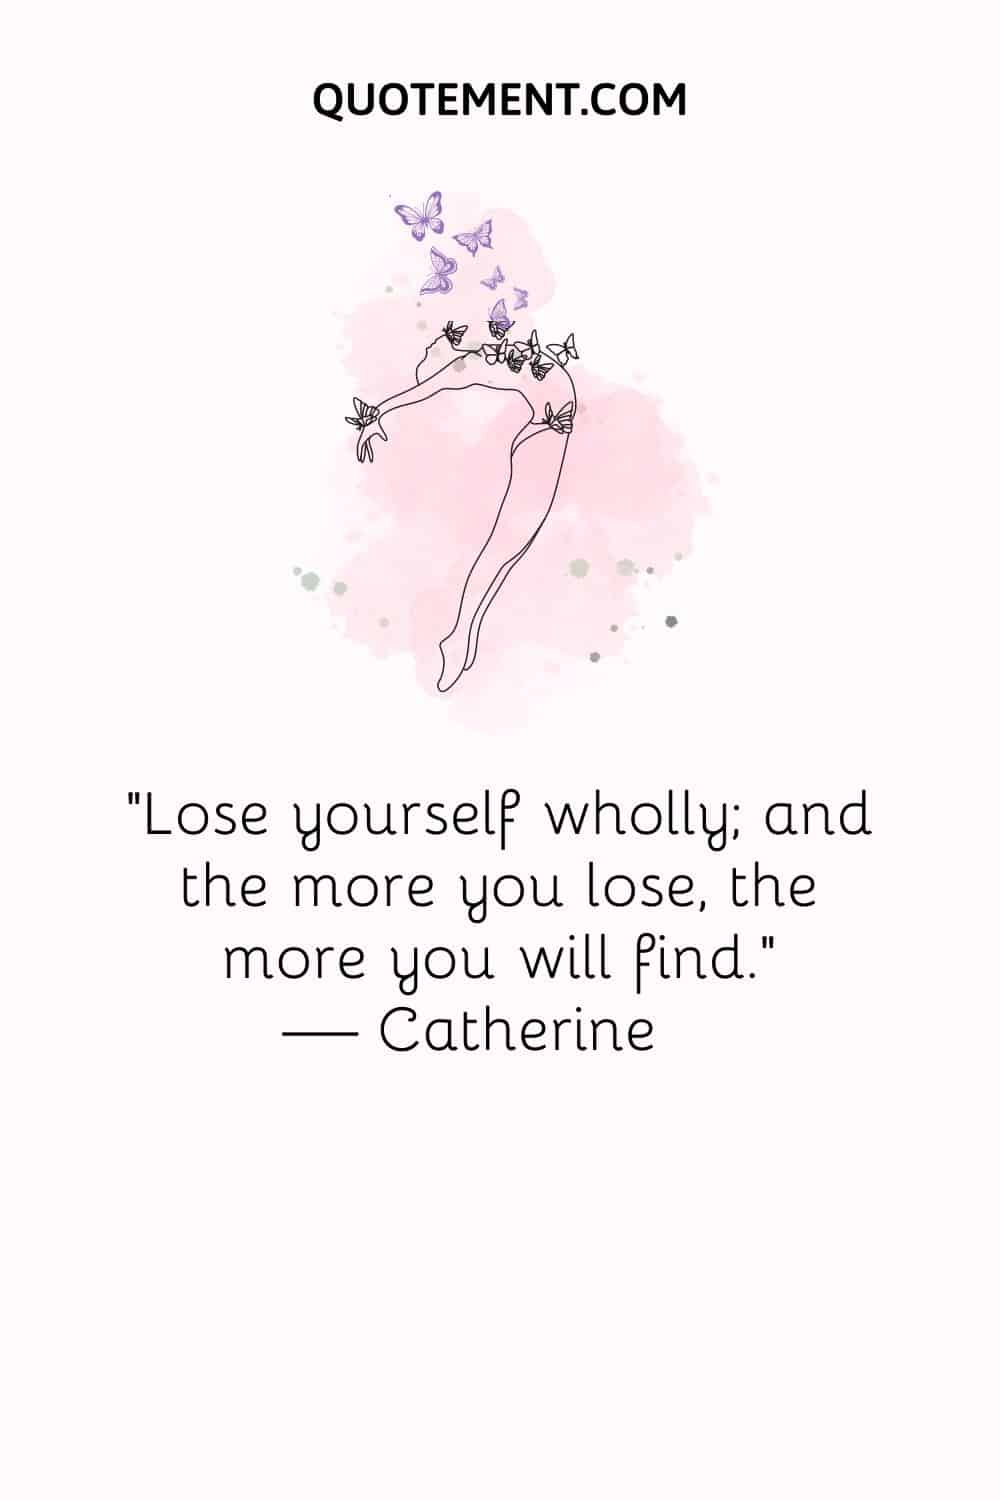 Lose yourself wholly; and the more you lose, the more you will find